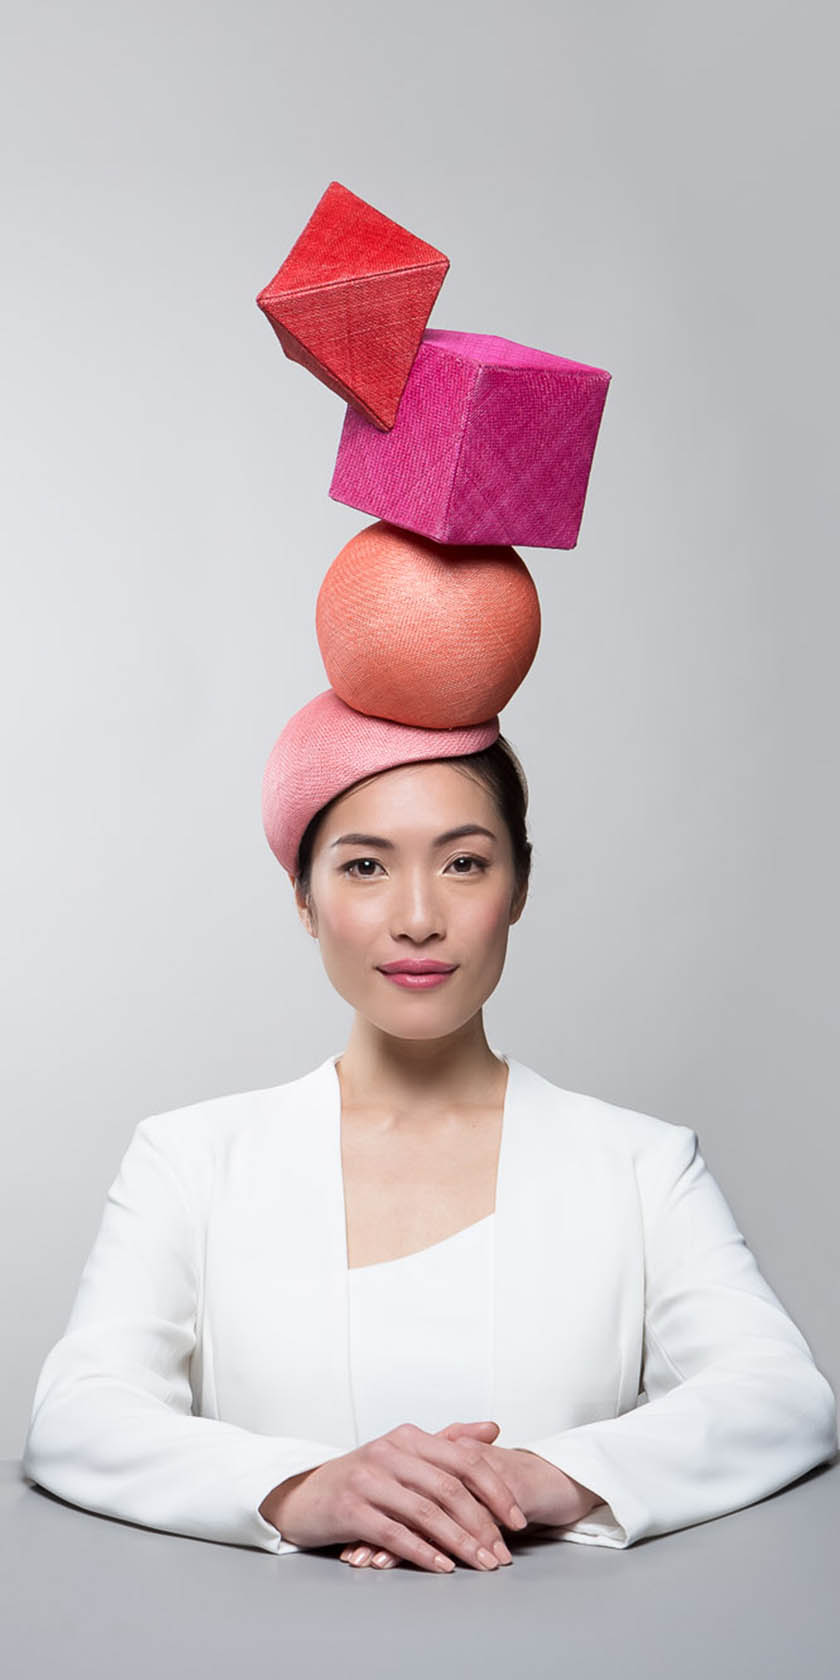 Counter Balance by Lauren J Ritchie Millinery. Photo by Richard Shaw